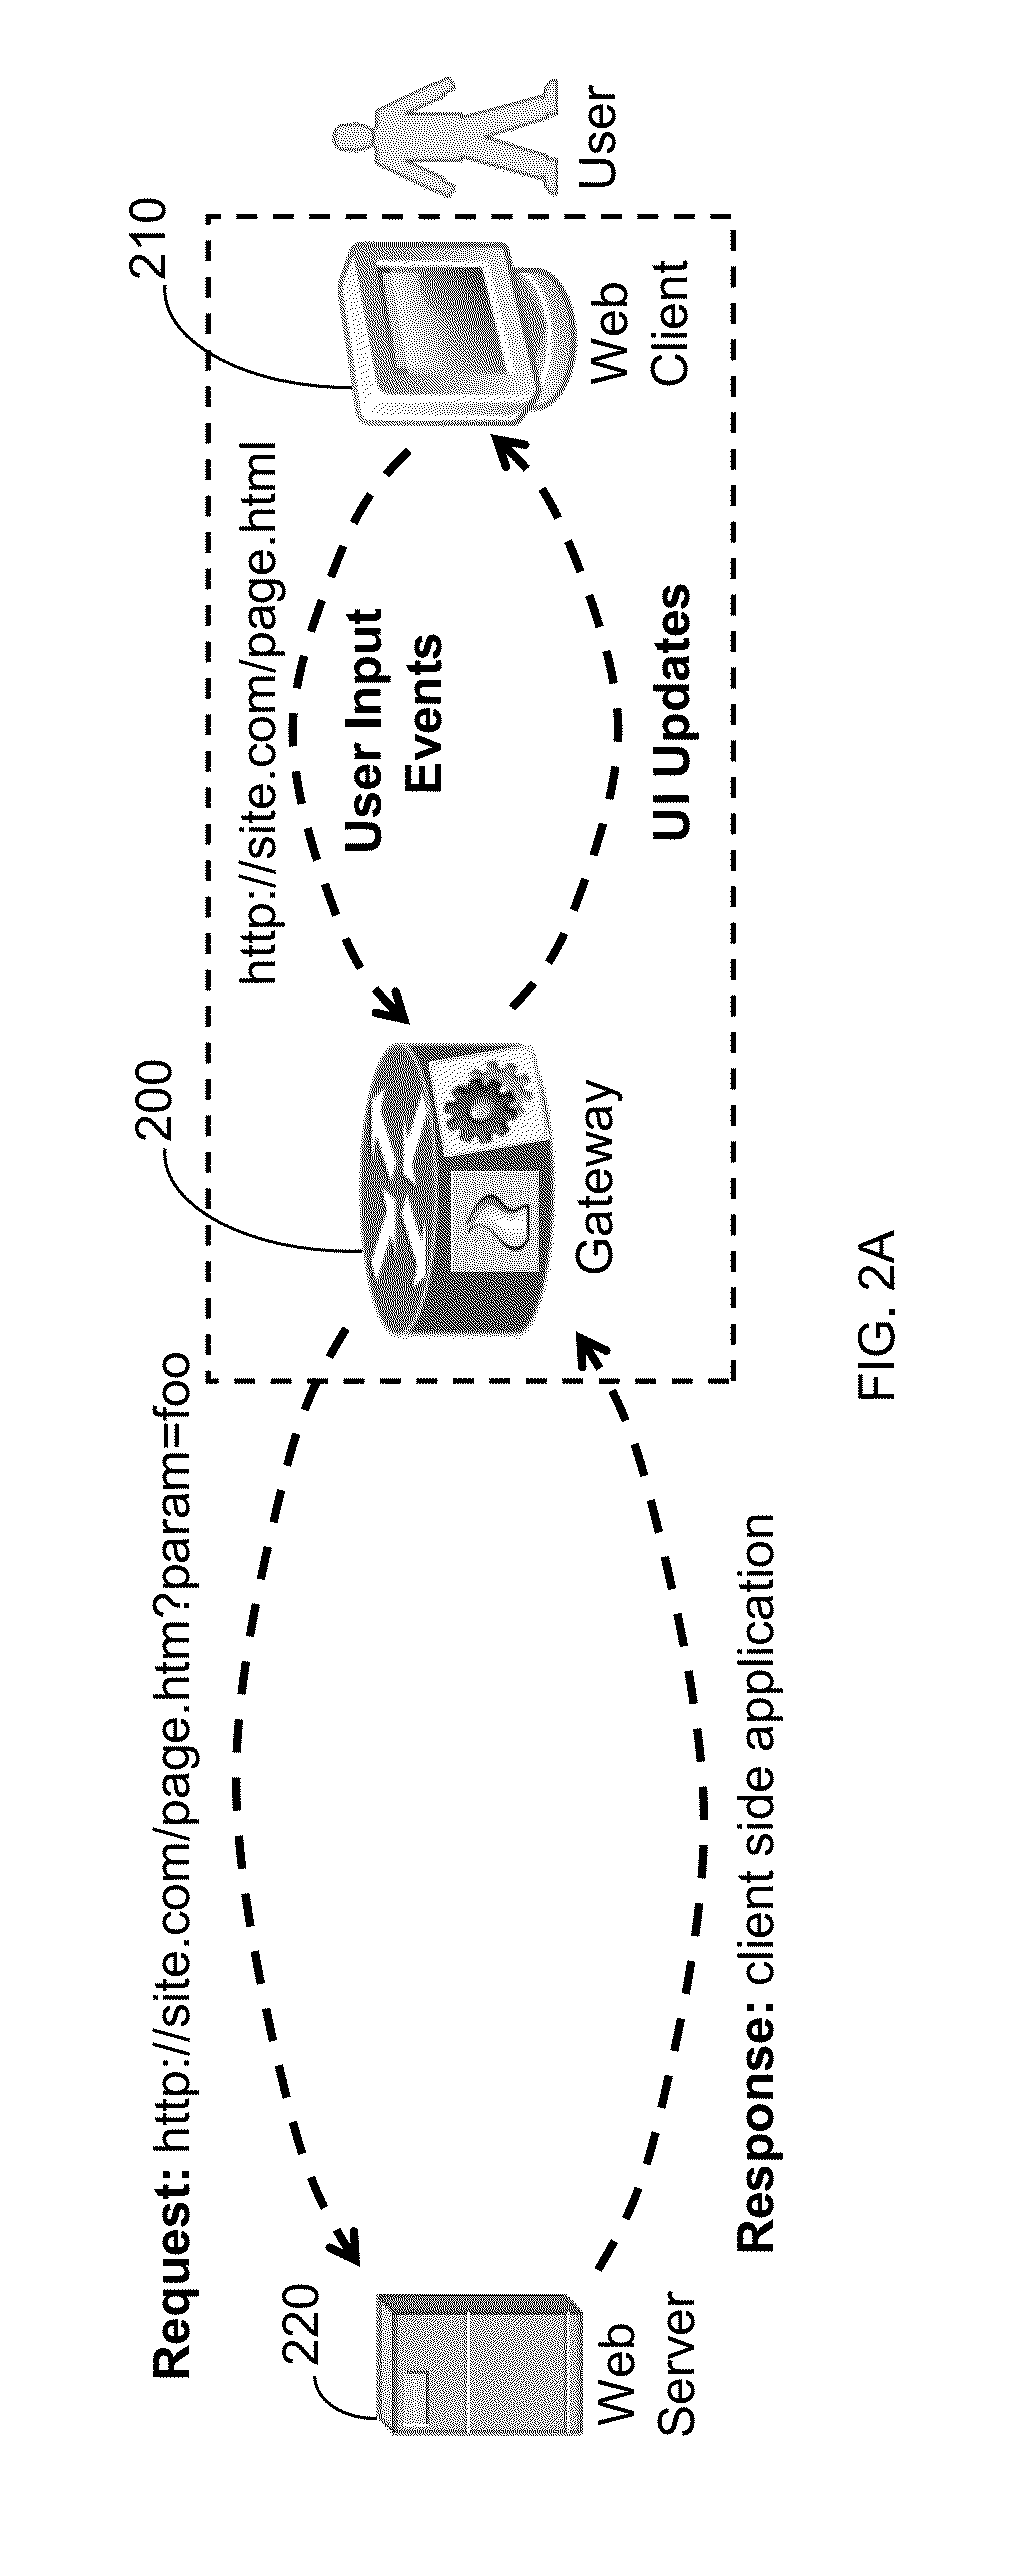 System and method for protecting web clients and web-based applications